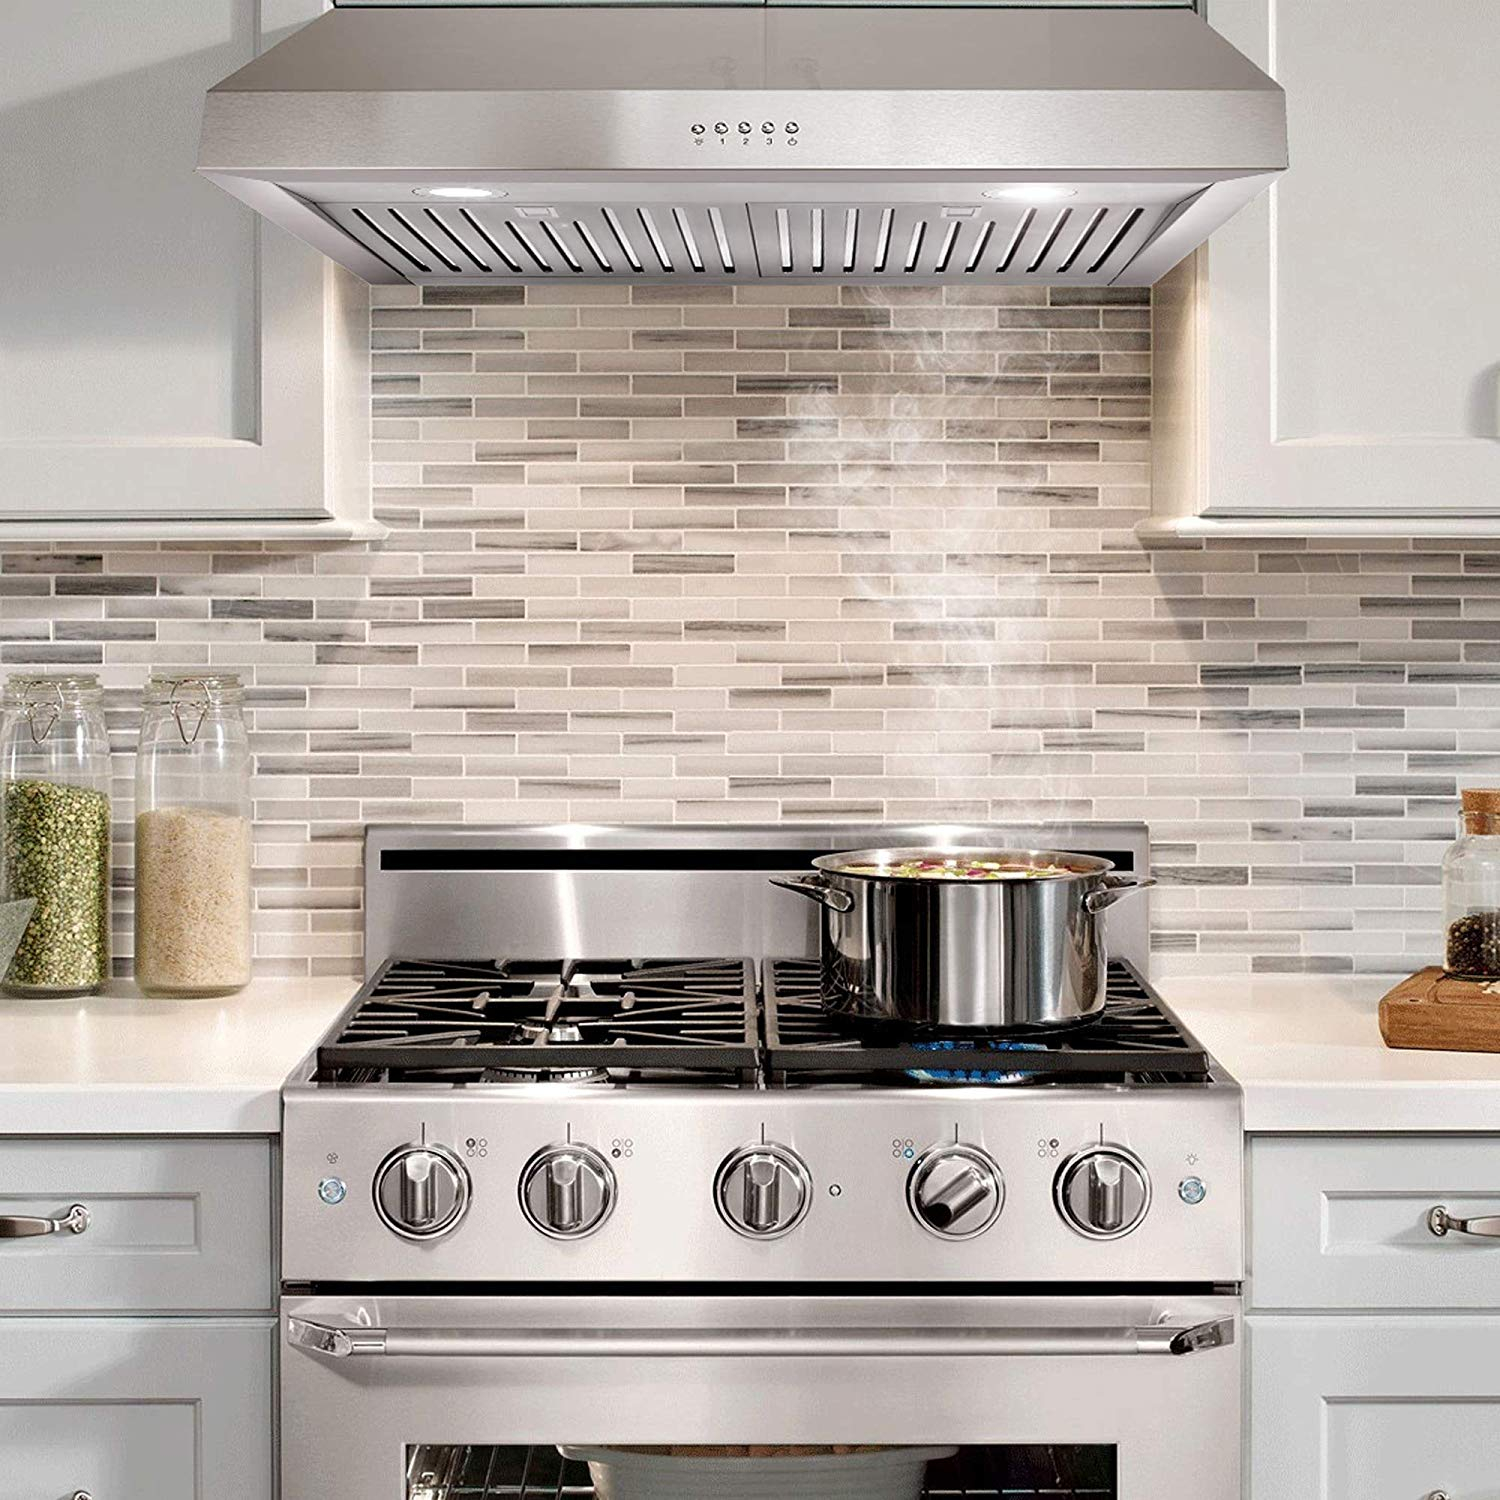 Details About 30 Under Cabinet Range Hood 500 Cfm 3 Speed Exhaust Fan Kitchen Over Stove Vent within sizing 1500 X 1500